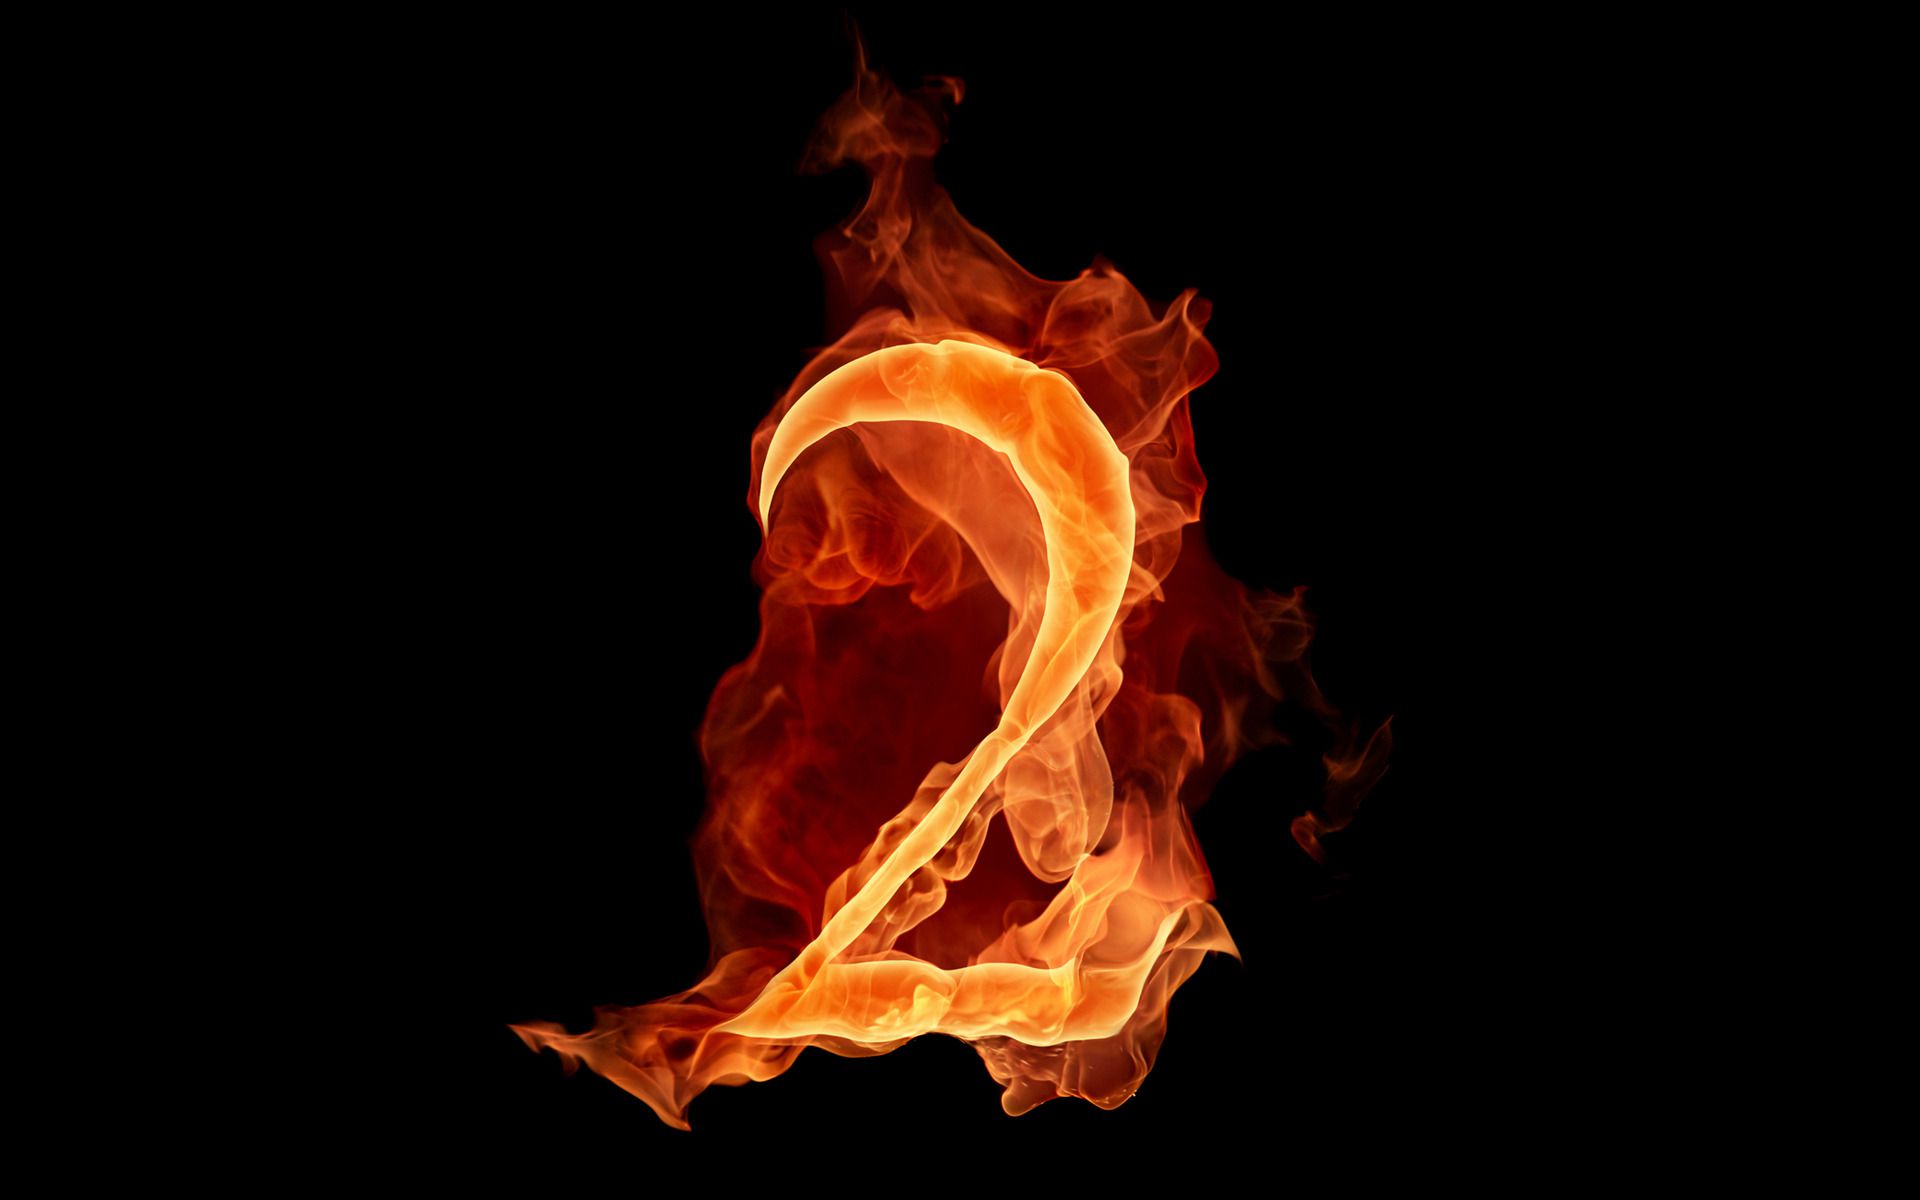 Flaming Fiery Number 2 Wallpaper - Download Wallpapers In HD ...